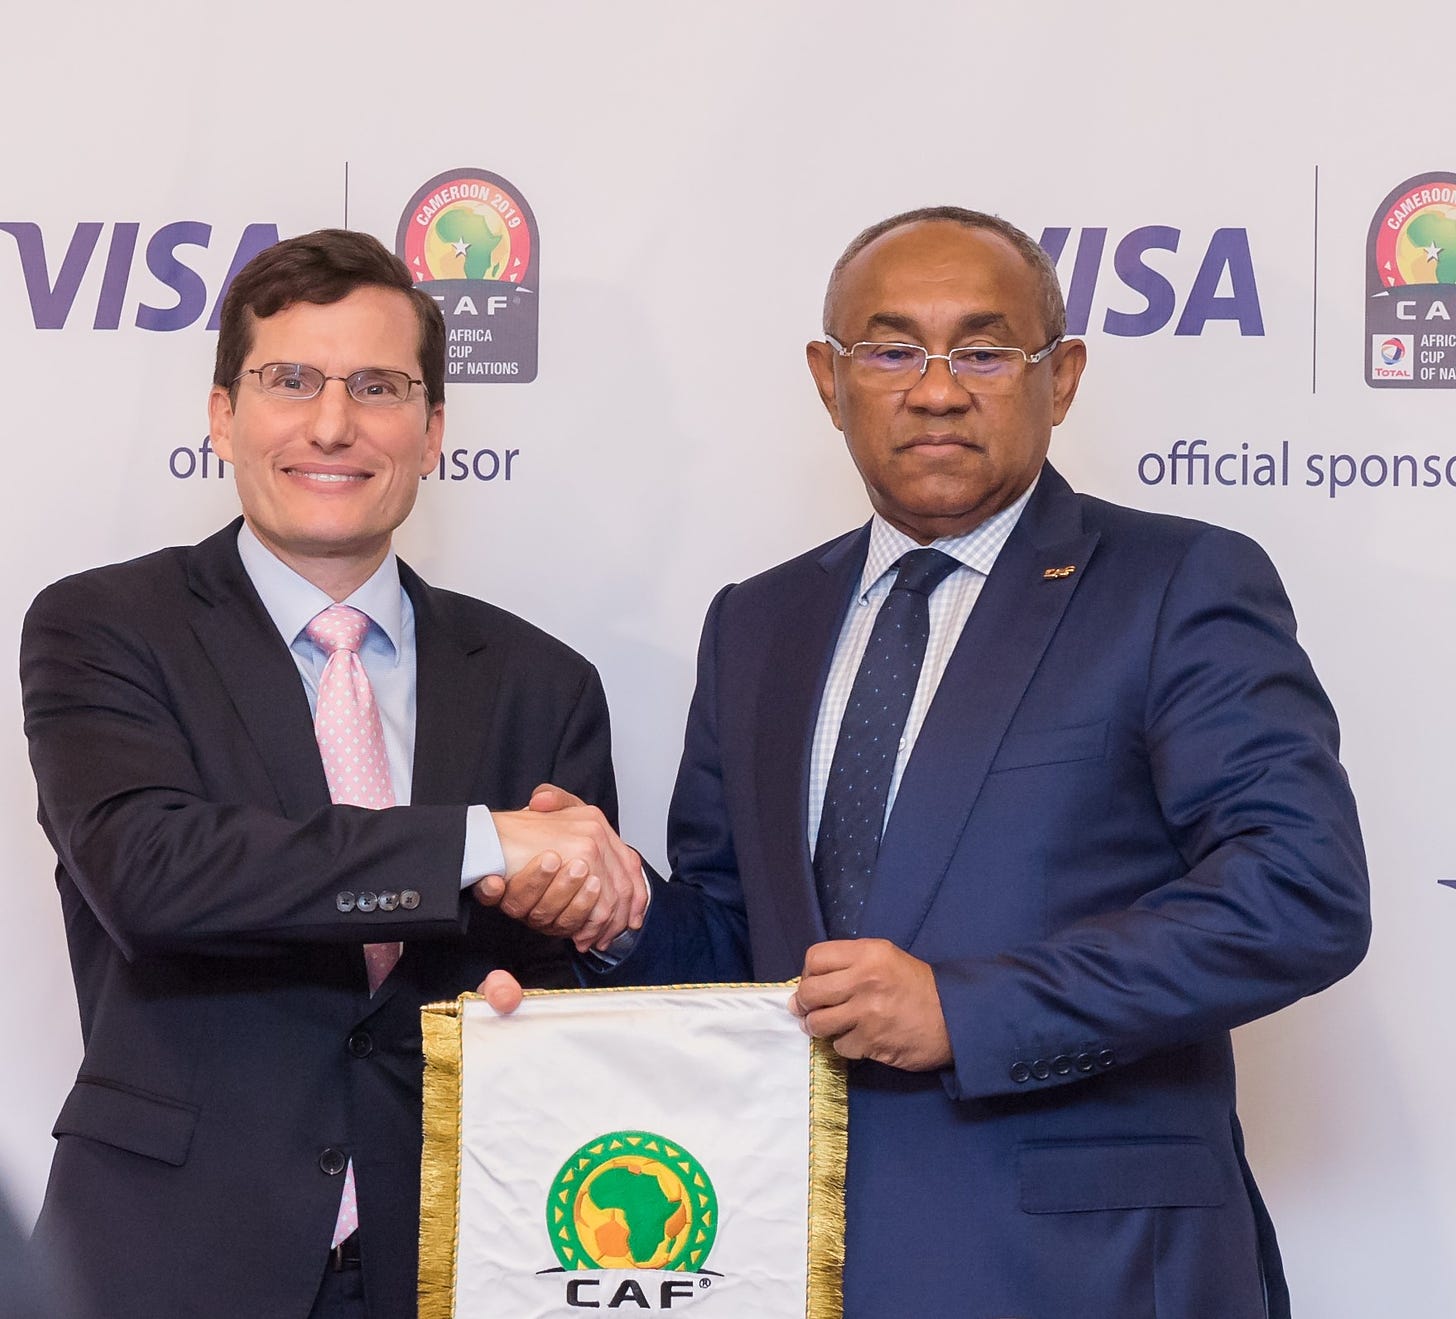 Visa to sponsor CAF Africa Cup of Nations 2019, 2021 - Dailynewsegypt